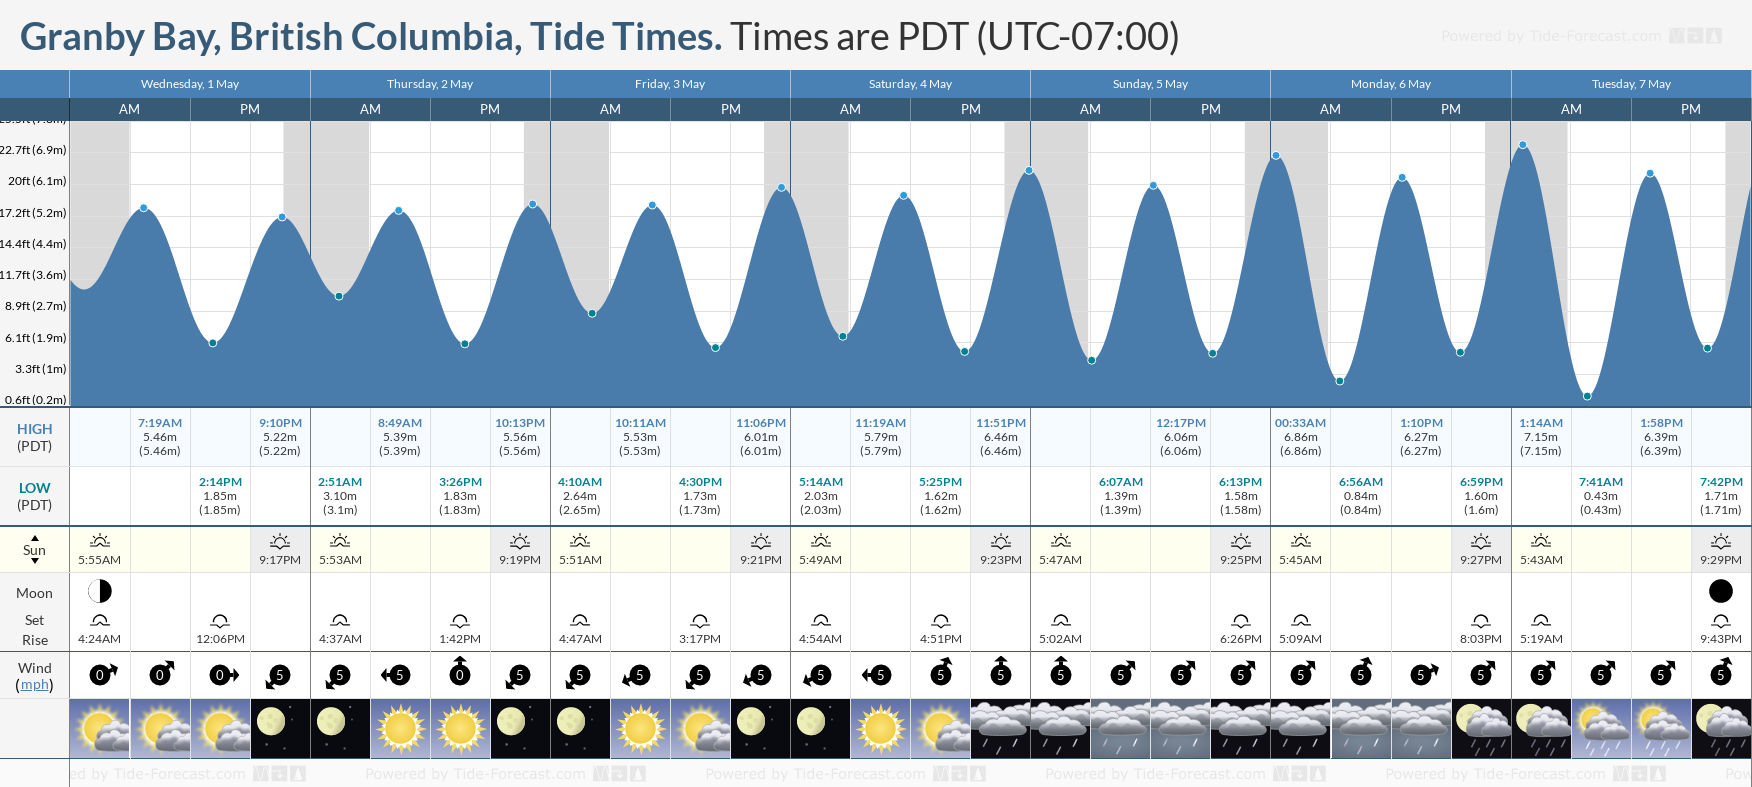 Granby Bay, British Columbia Tide Chart including high and low tide tide times for the next 7 days